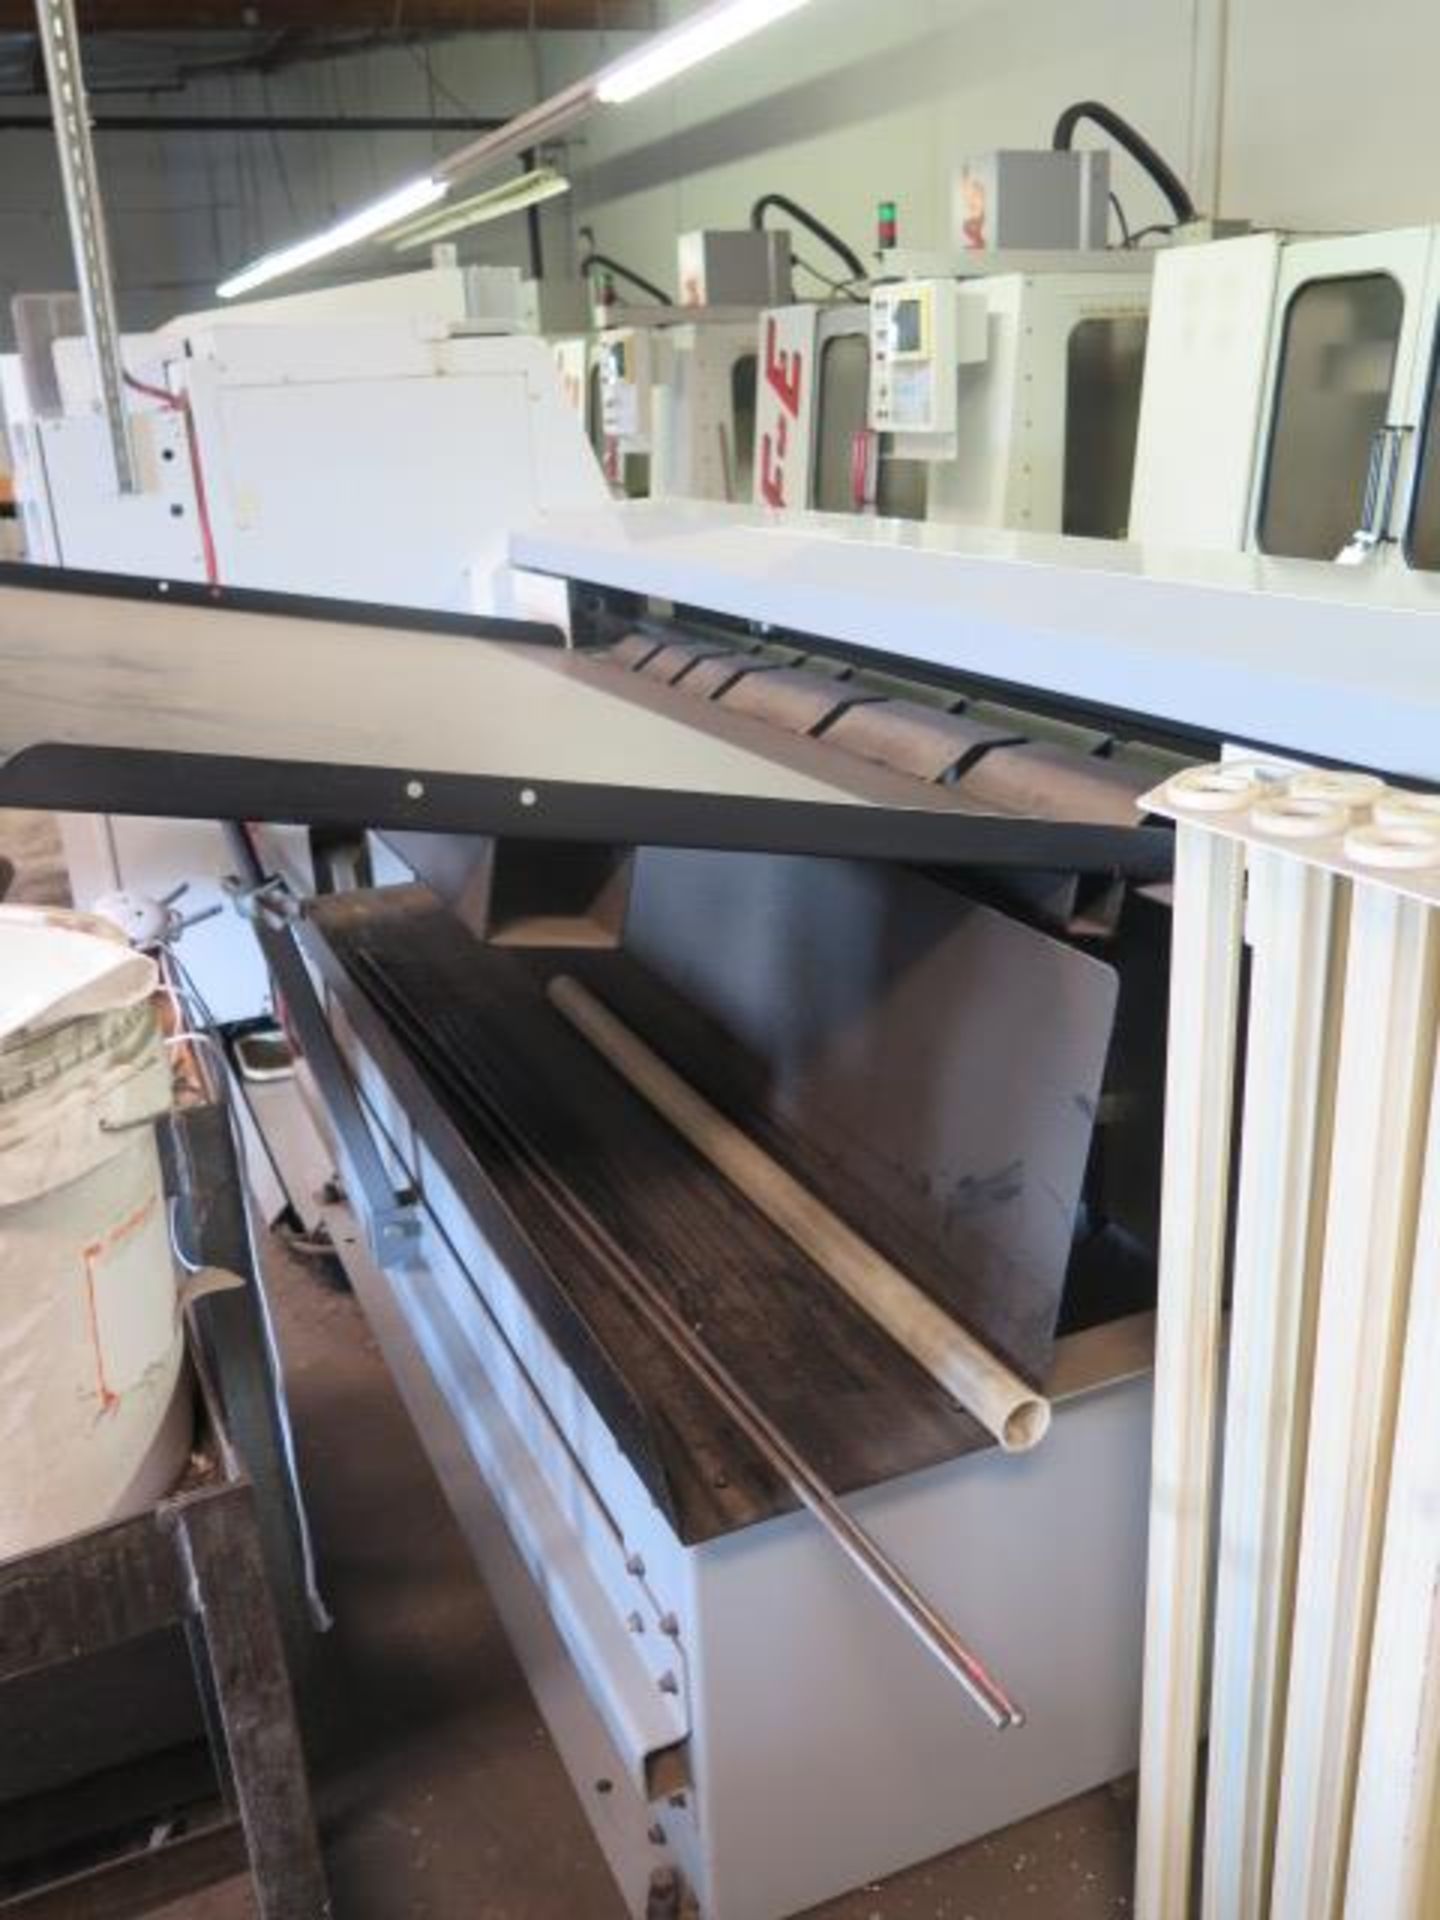 Haas Servobar 300 Automatic Bar Loader / Feeder s/n 92045 w/ Spindle Liner Set (SOLD AS-IS - NO WARR - Image 8 of 11